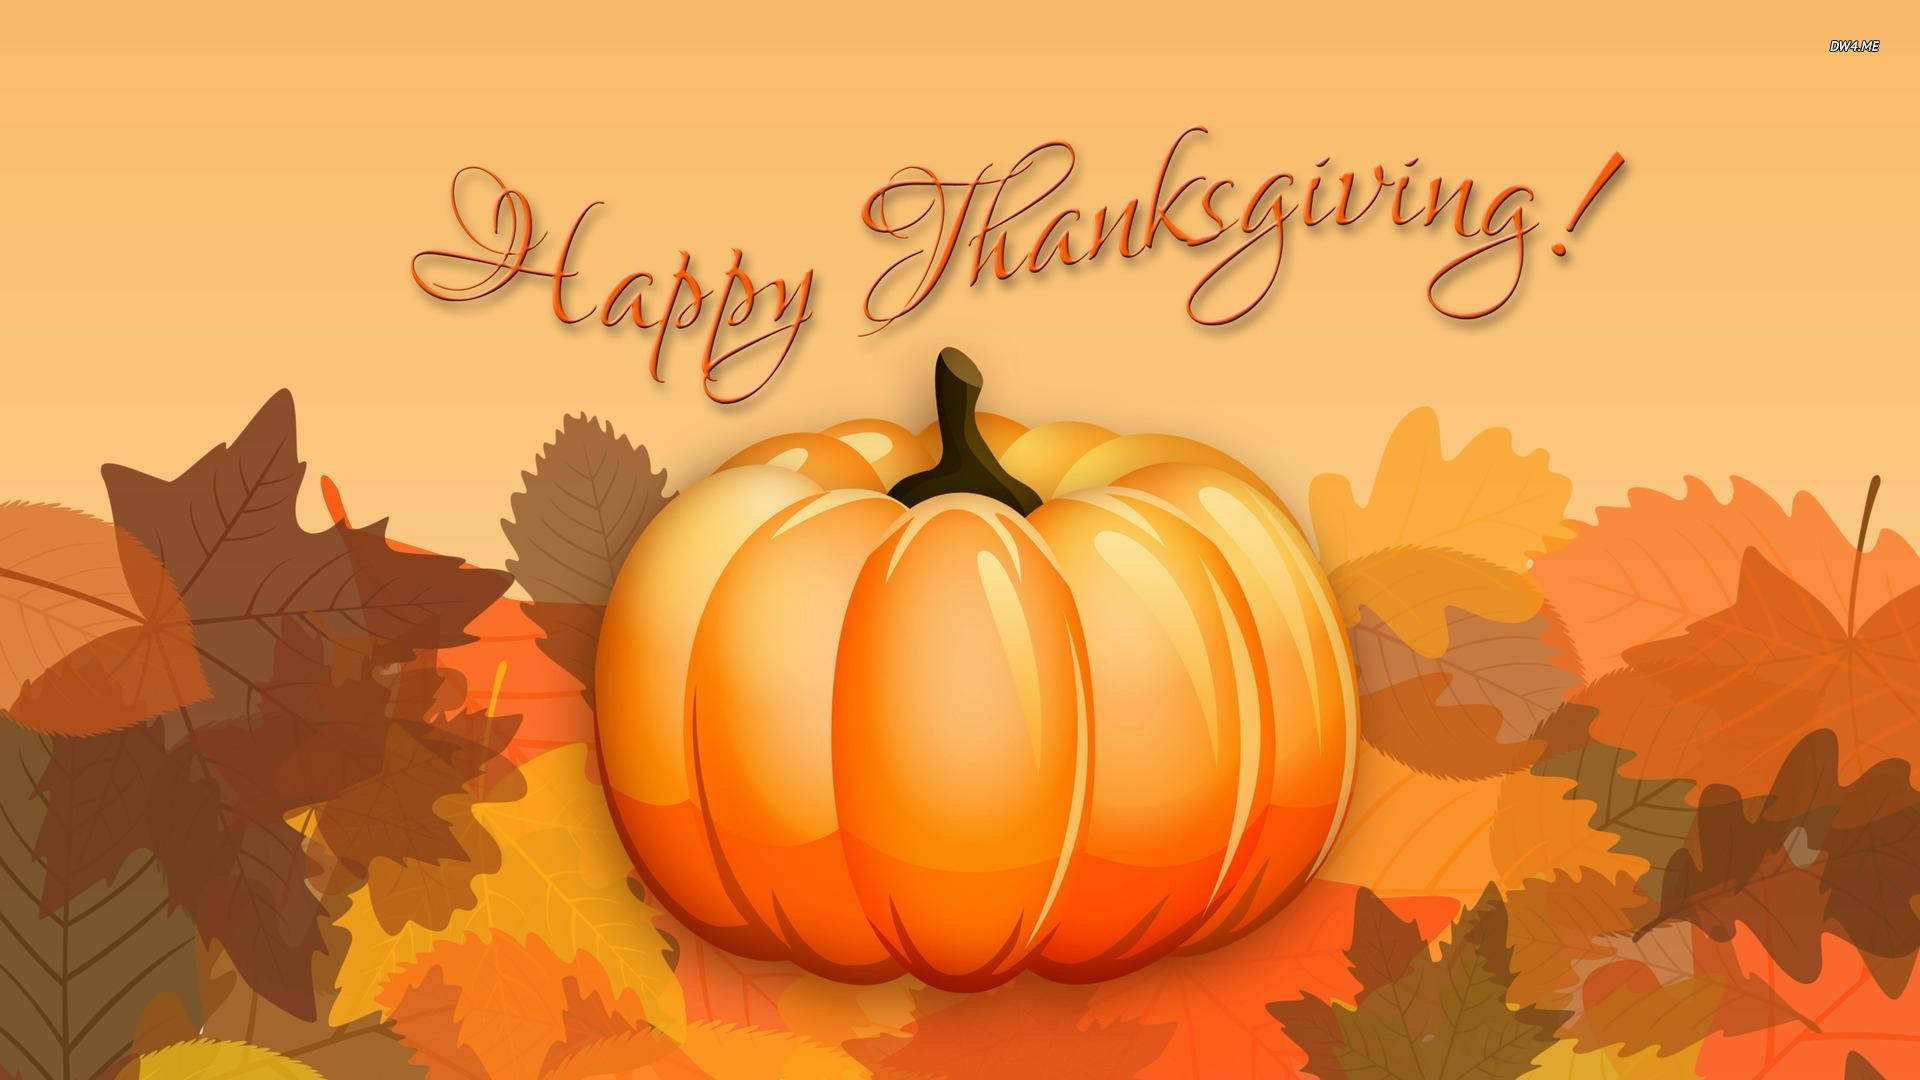 Thanksgiving Day Background Wallpaper